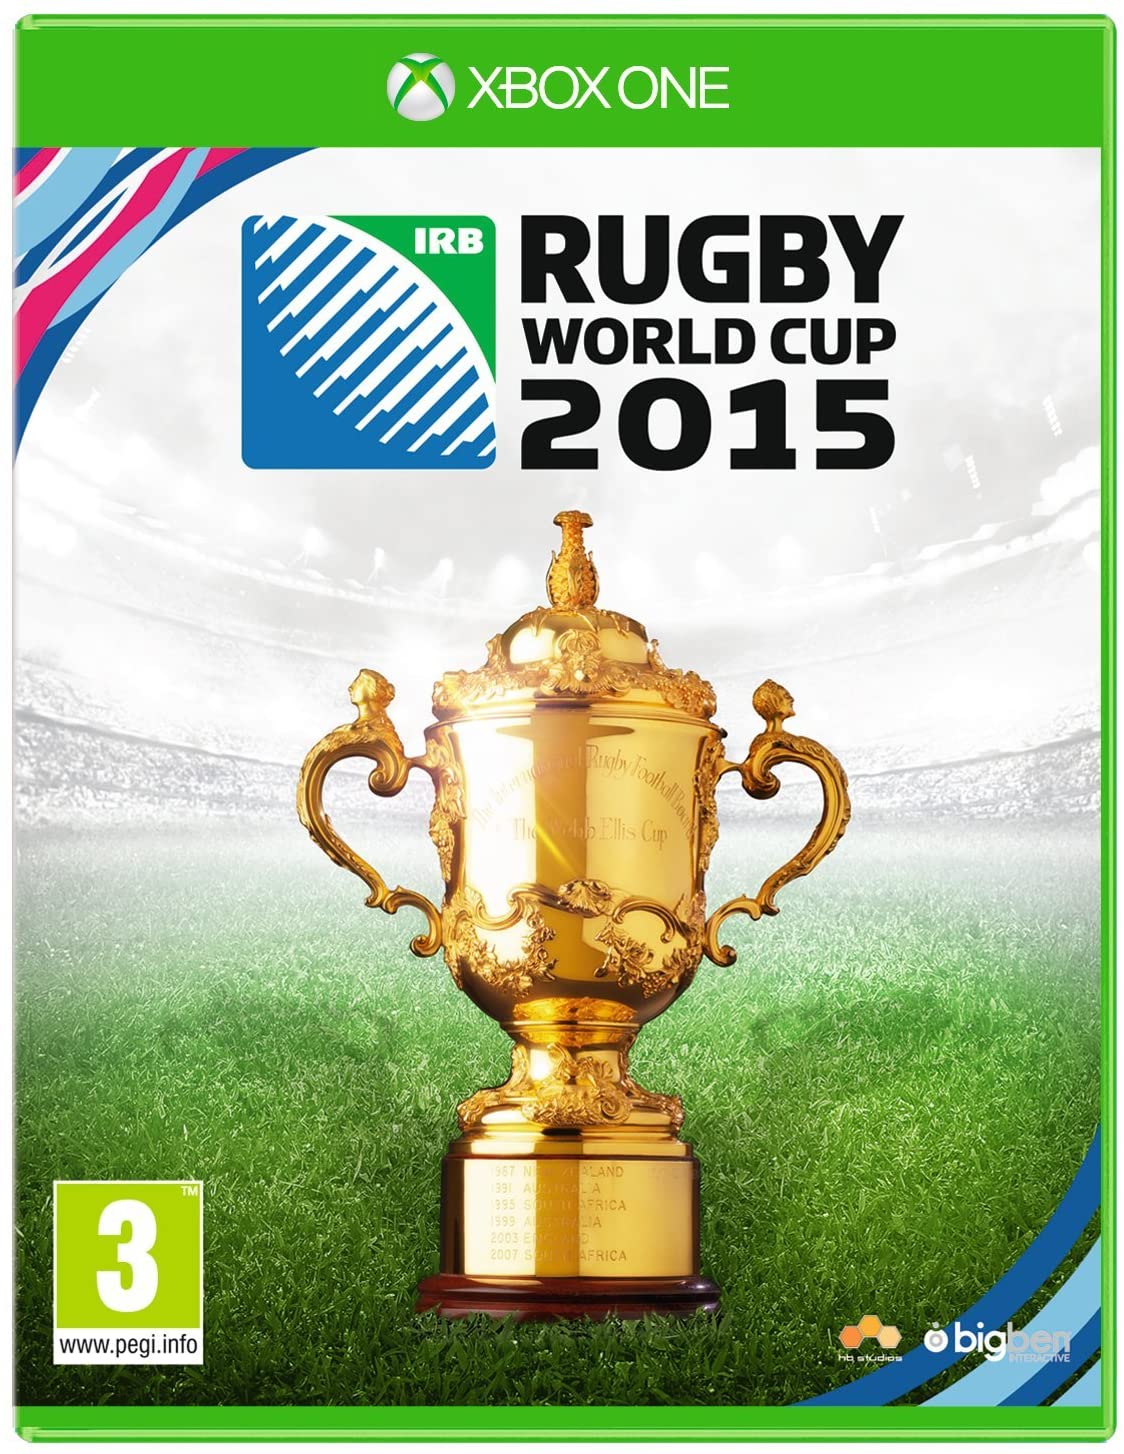 Rugby world cup 2015 - xbox one